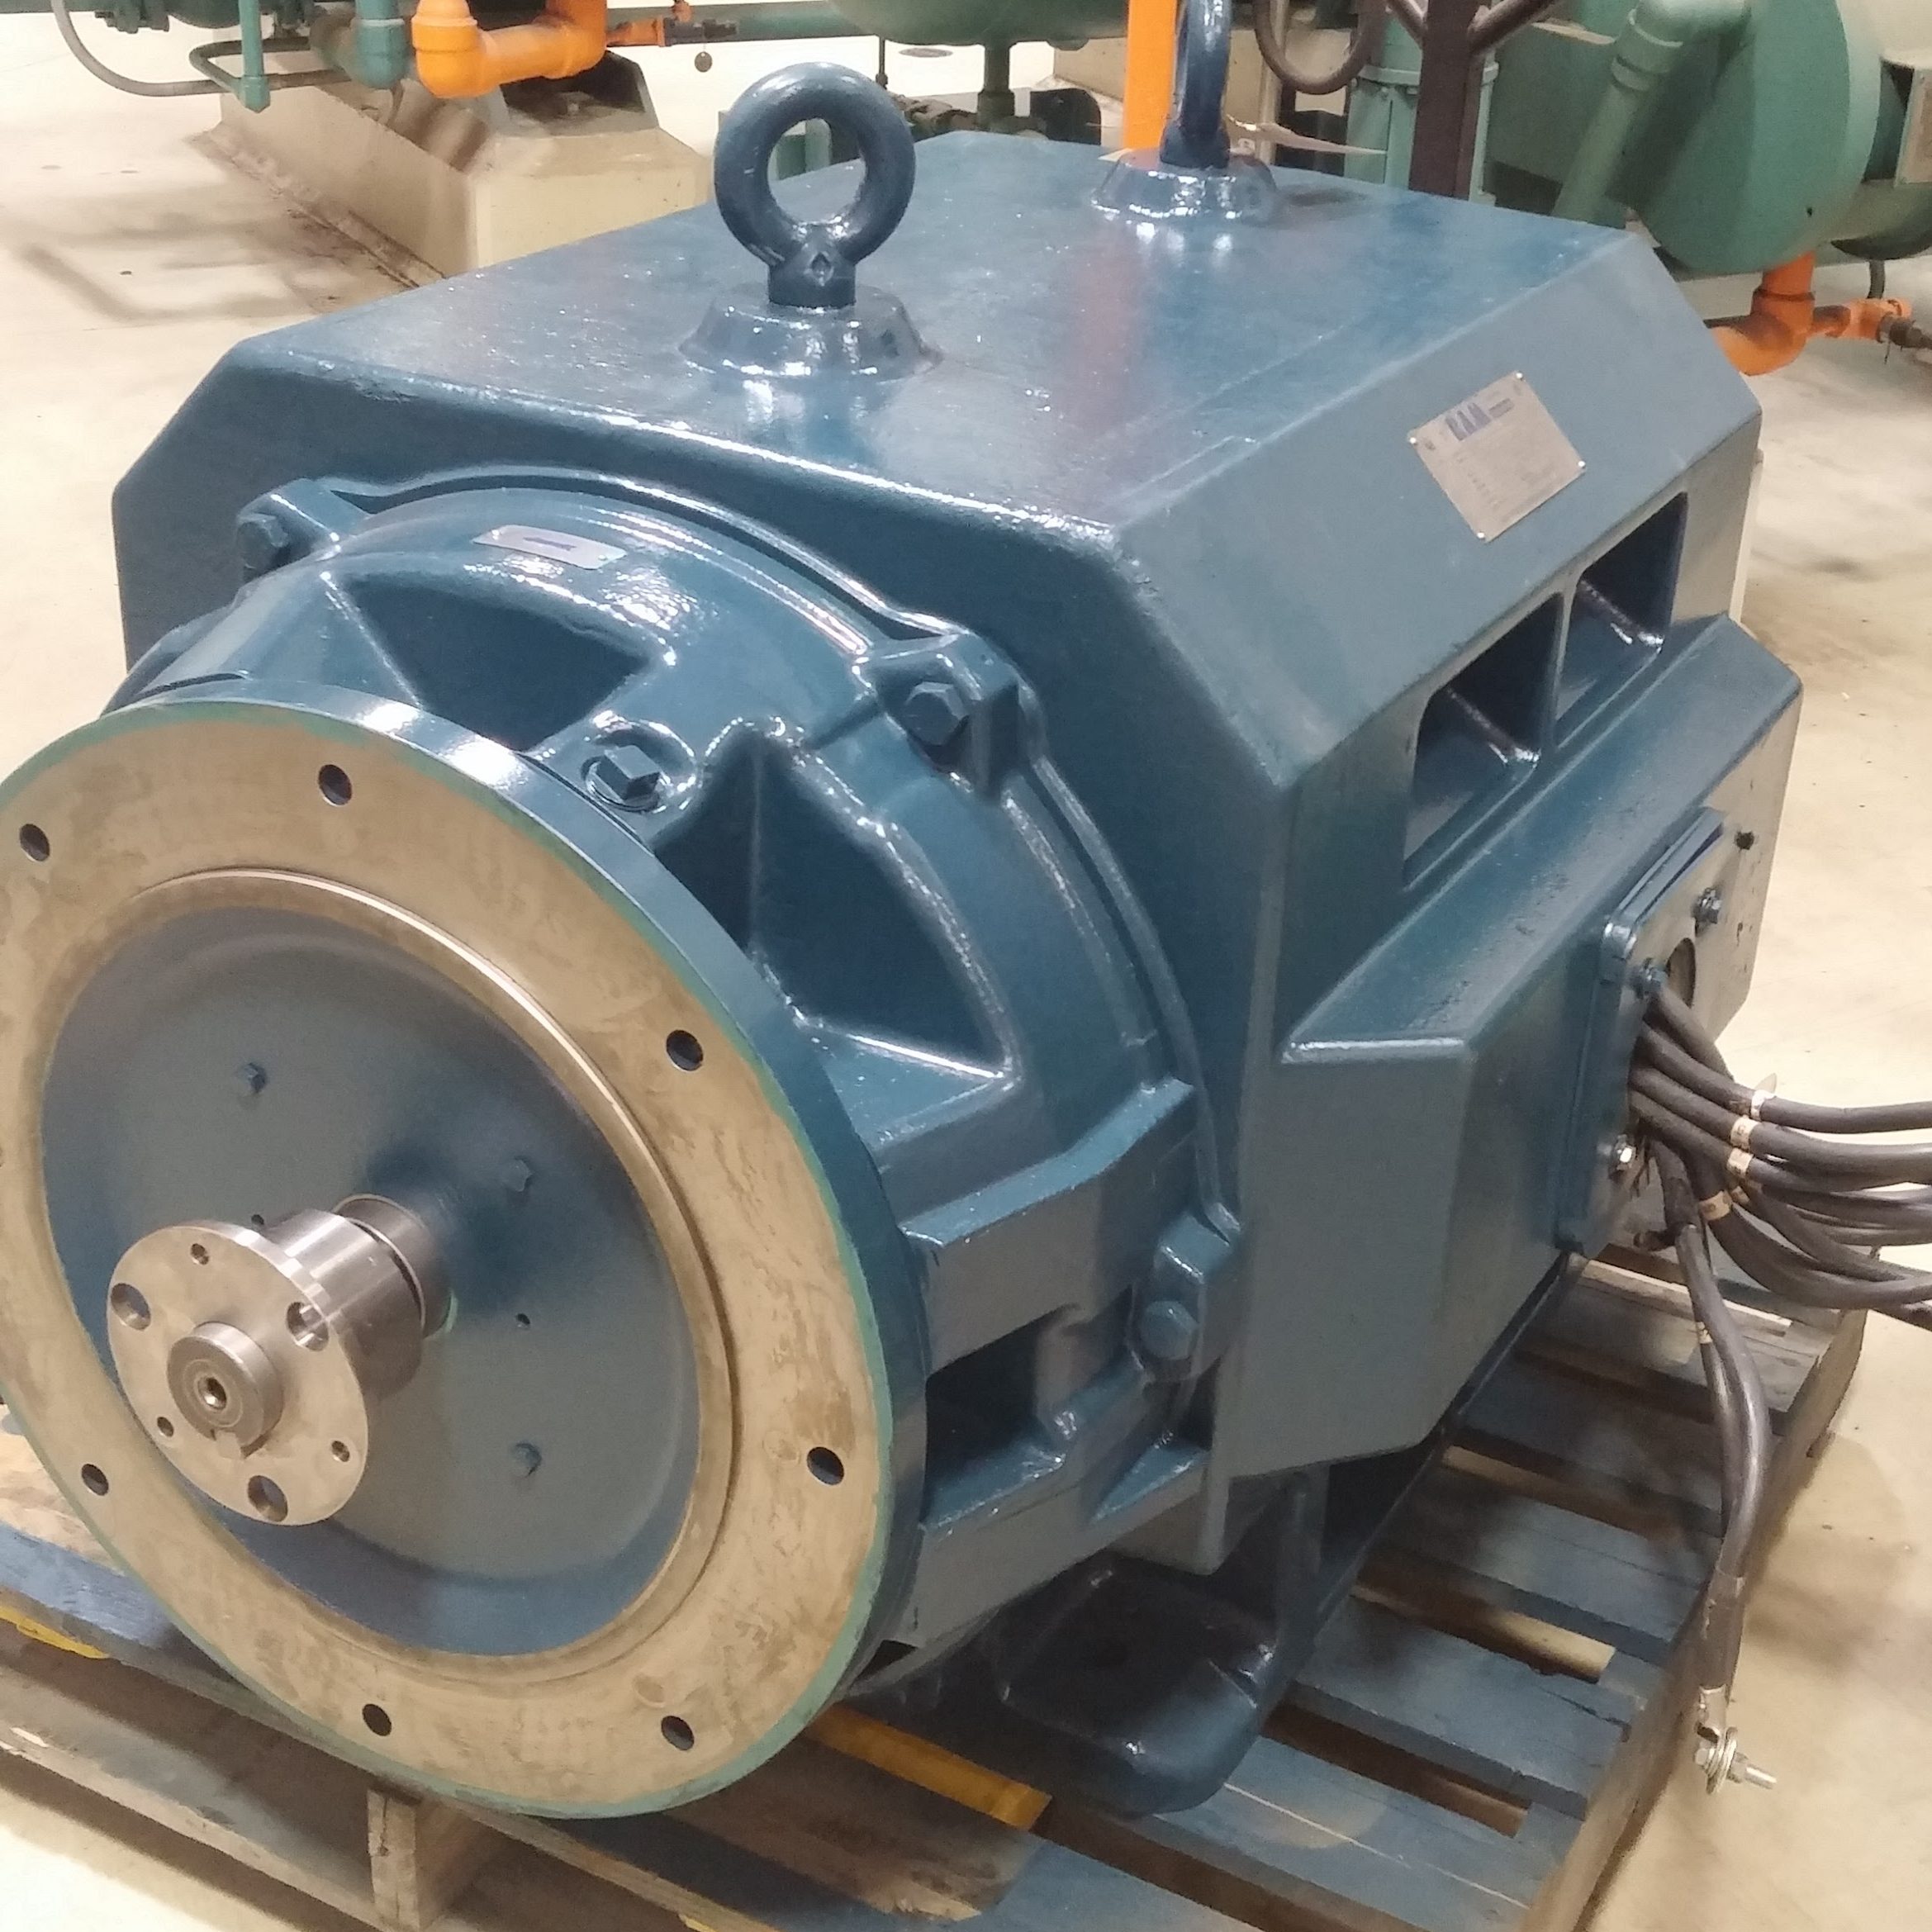 vibration analysis services include commissioning motors